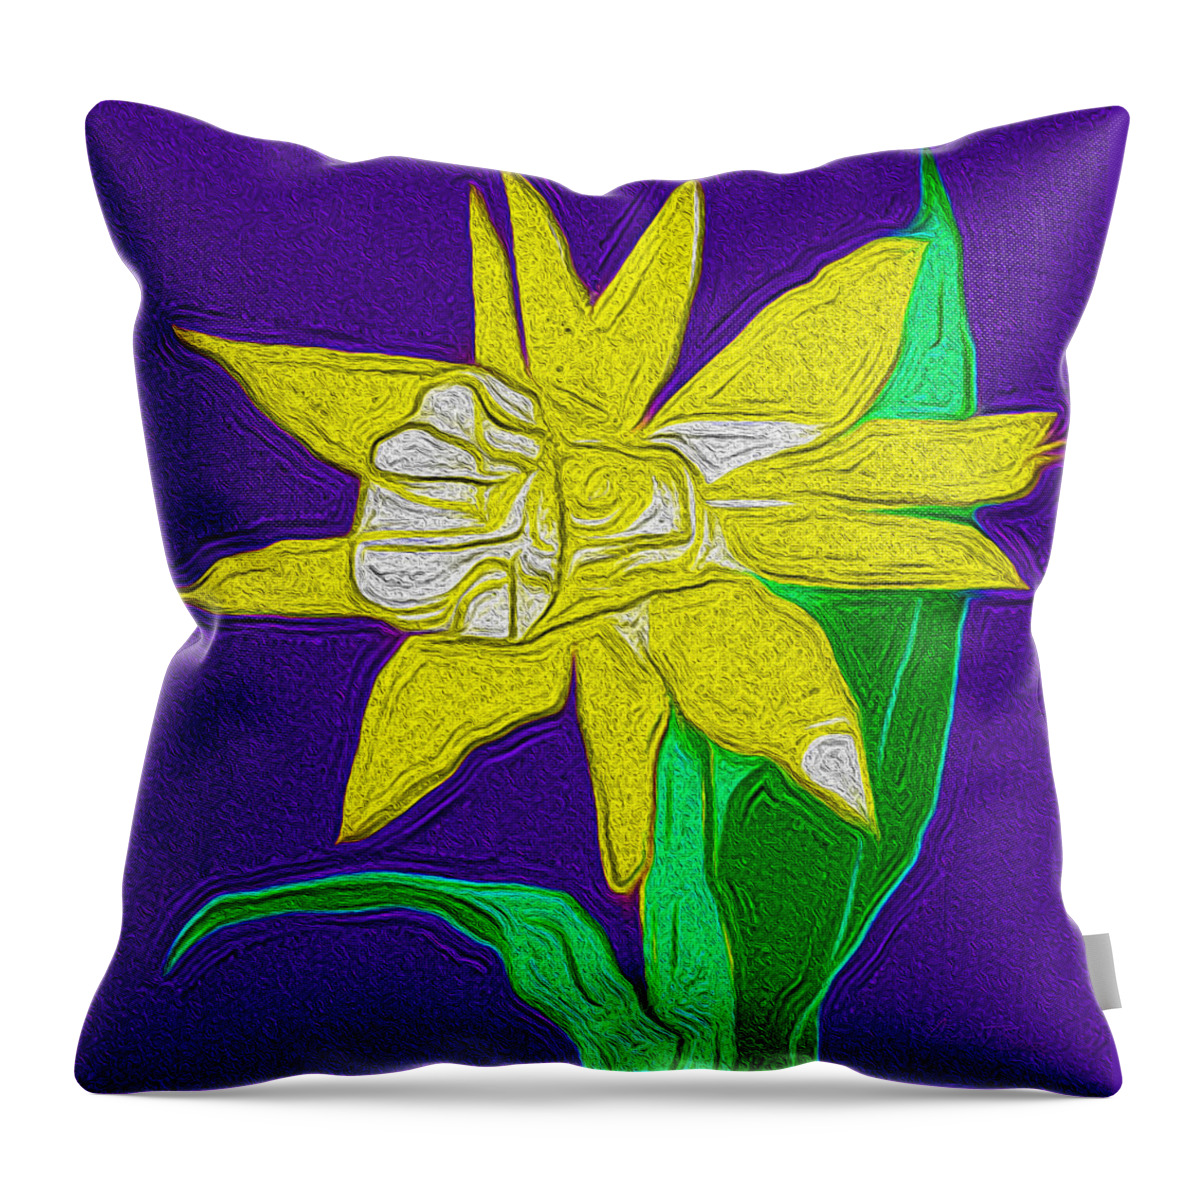 Spring Bulbs Throw Pillow featuring the digital art Daffodil - Narcissus by Robert J Sadler